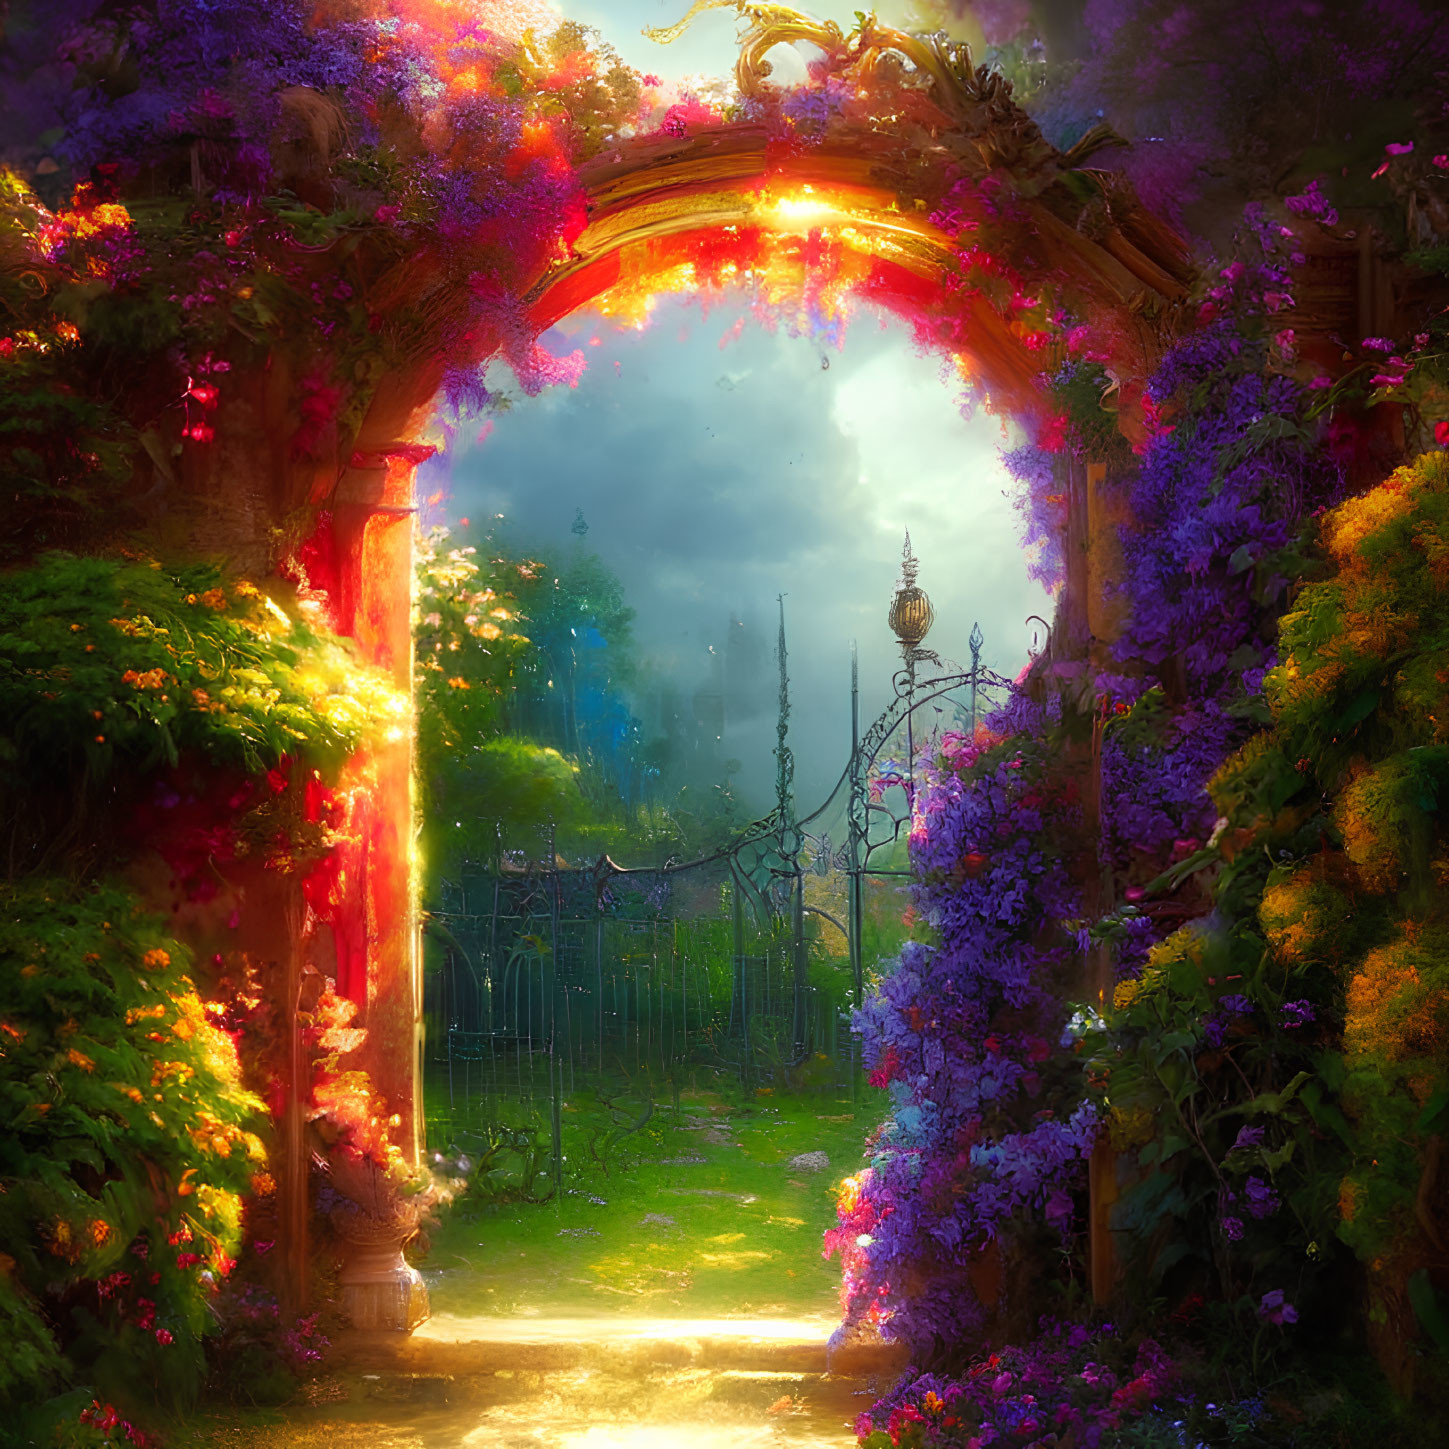 Stone archway covered in purple and pink flowers with golden-lit path and wrought iron gate